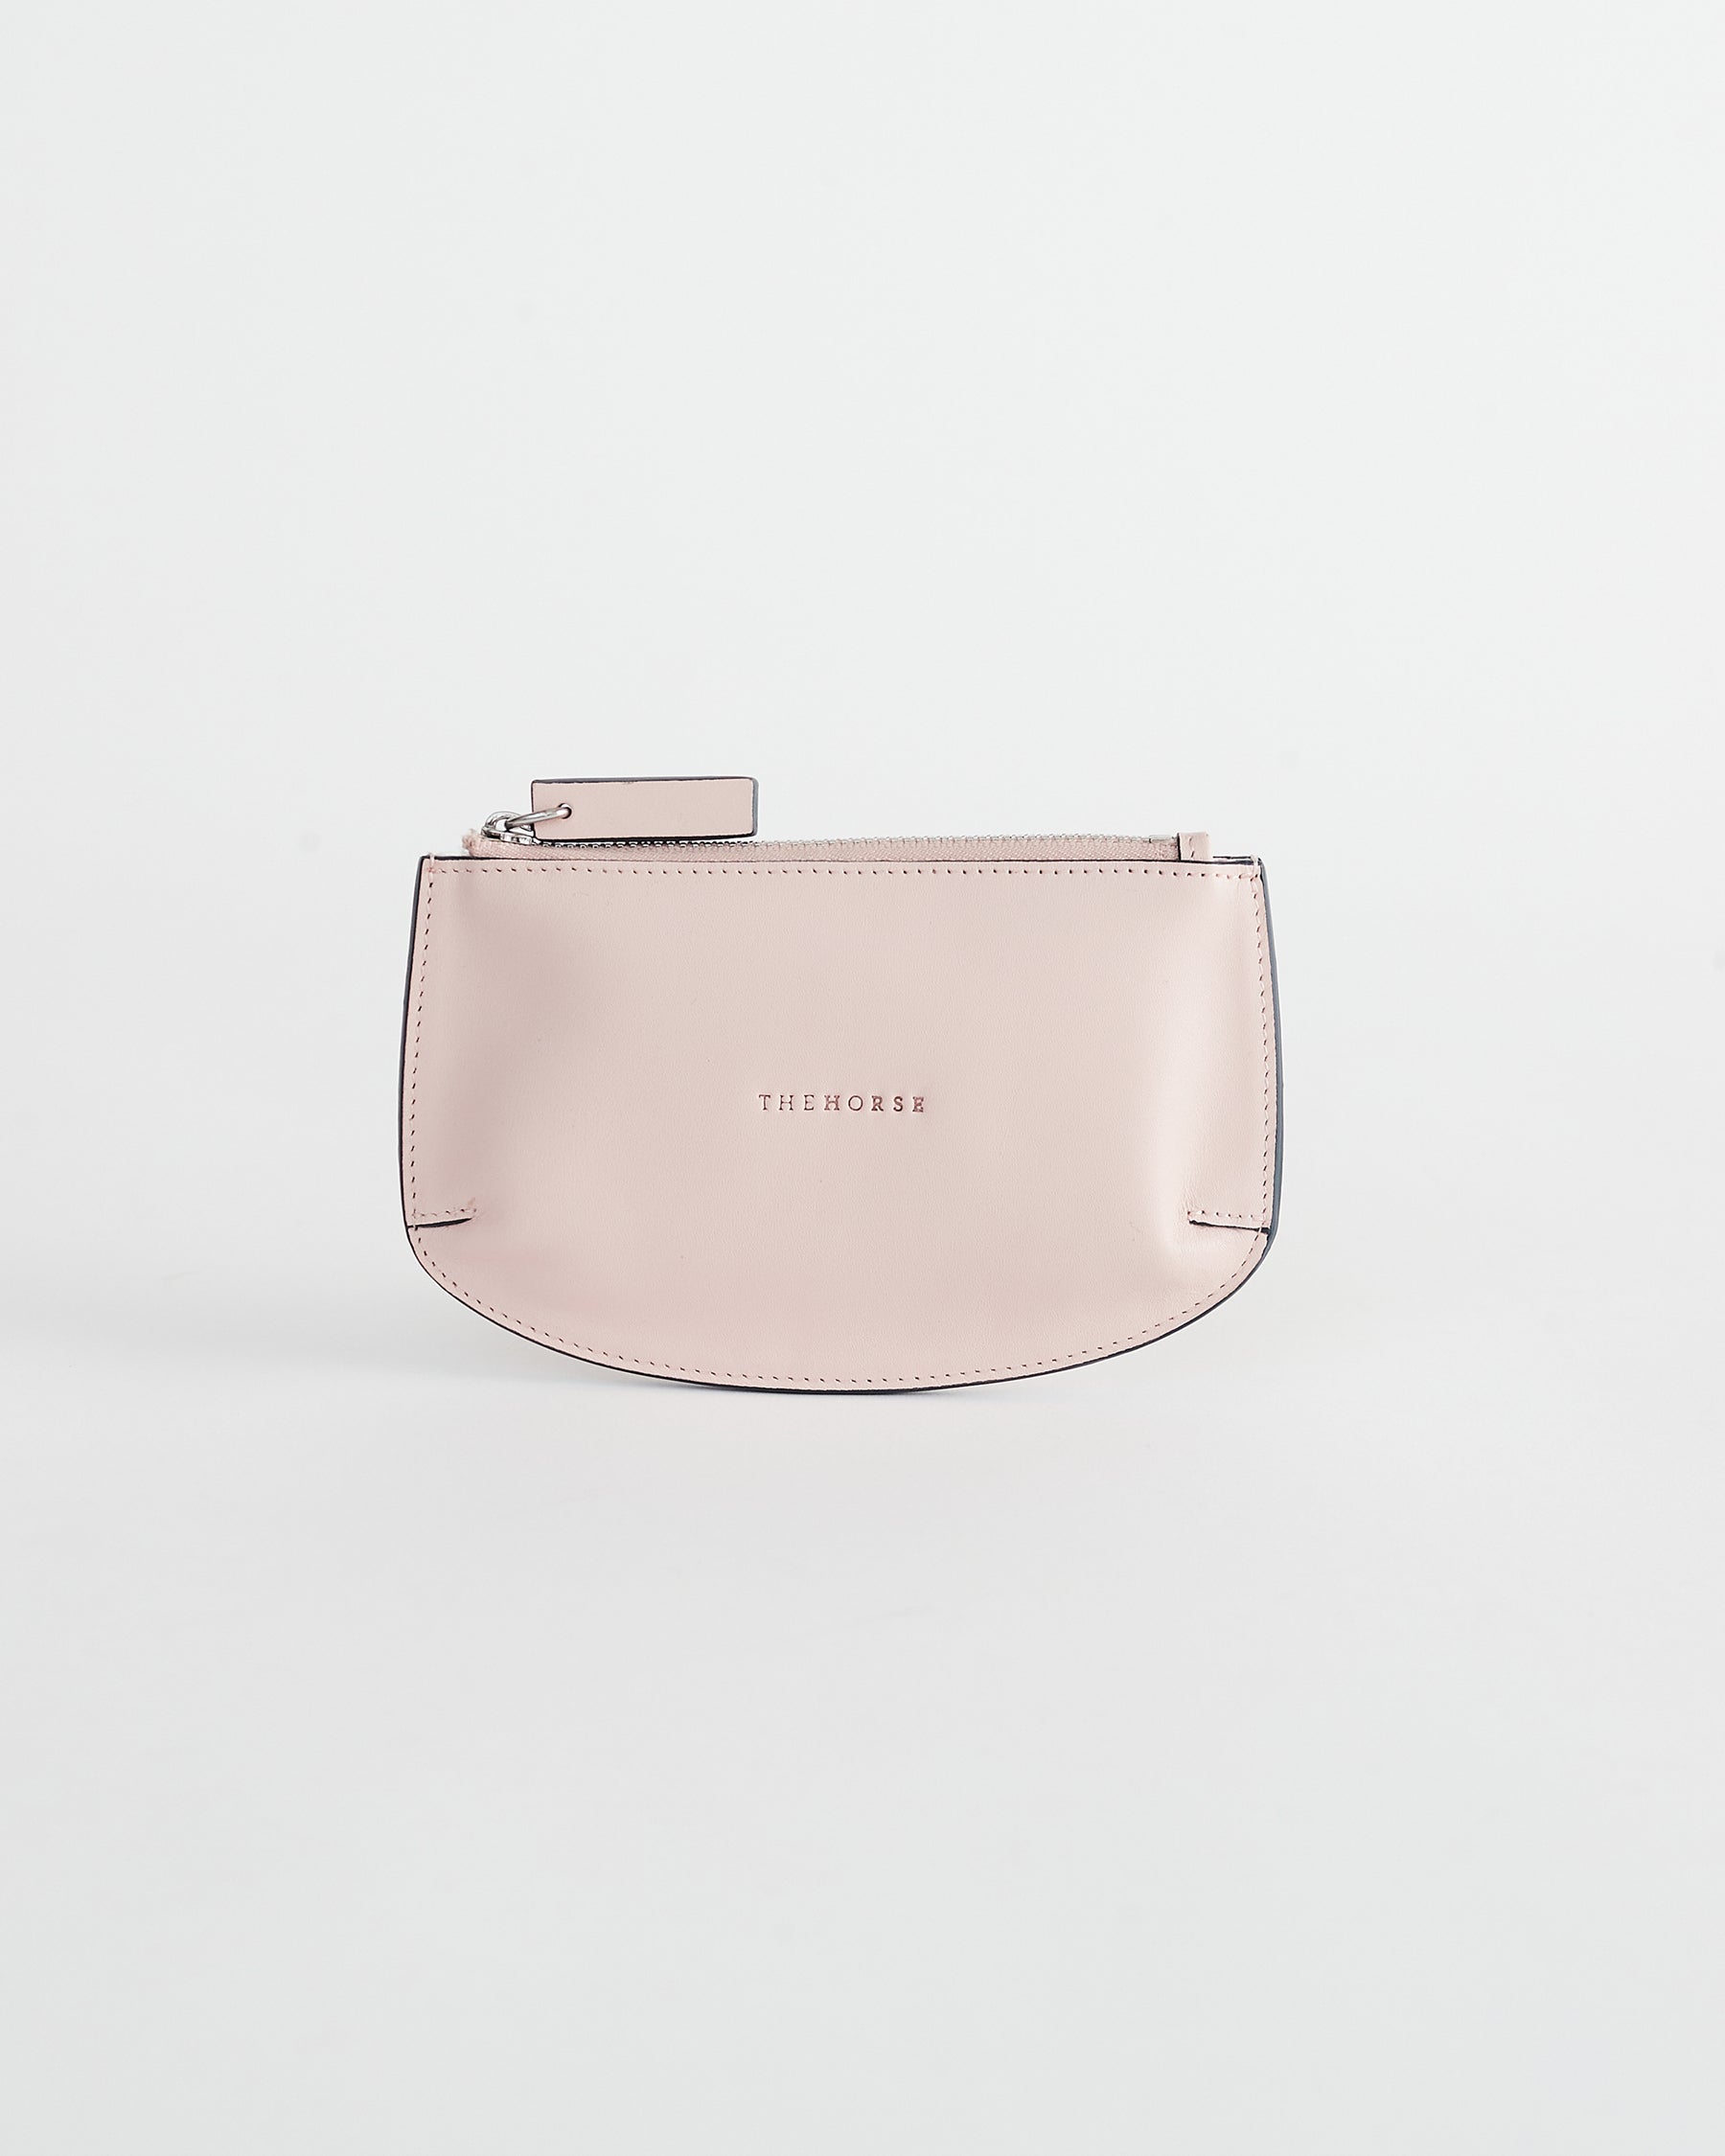 The Drew Women's Leather Zip Cardholder in Pink by The Horse®